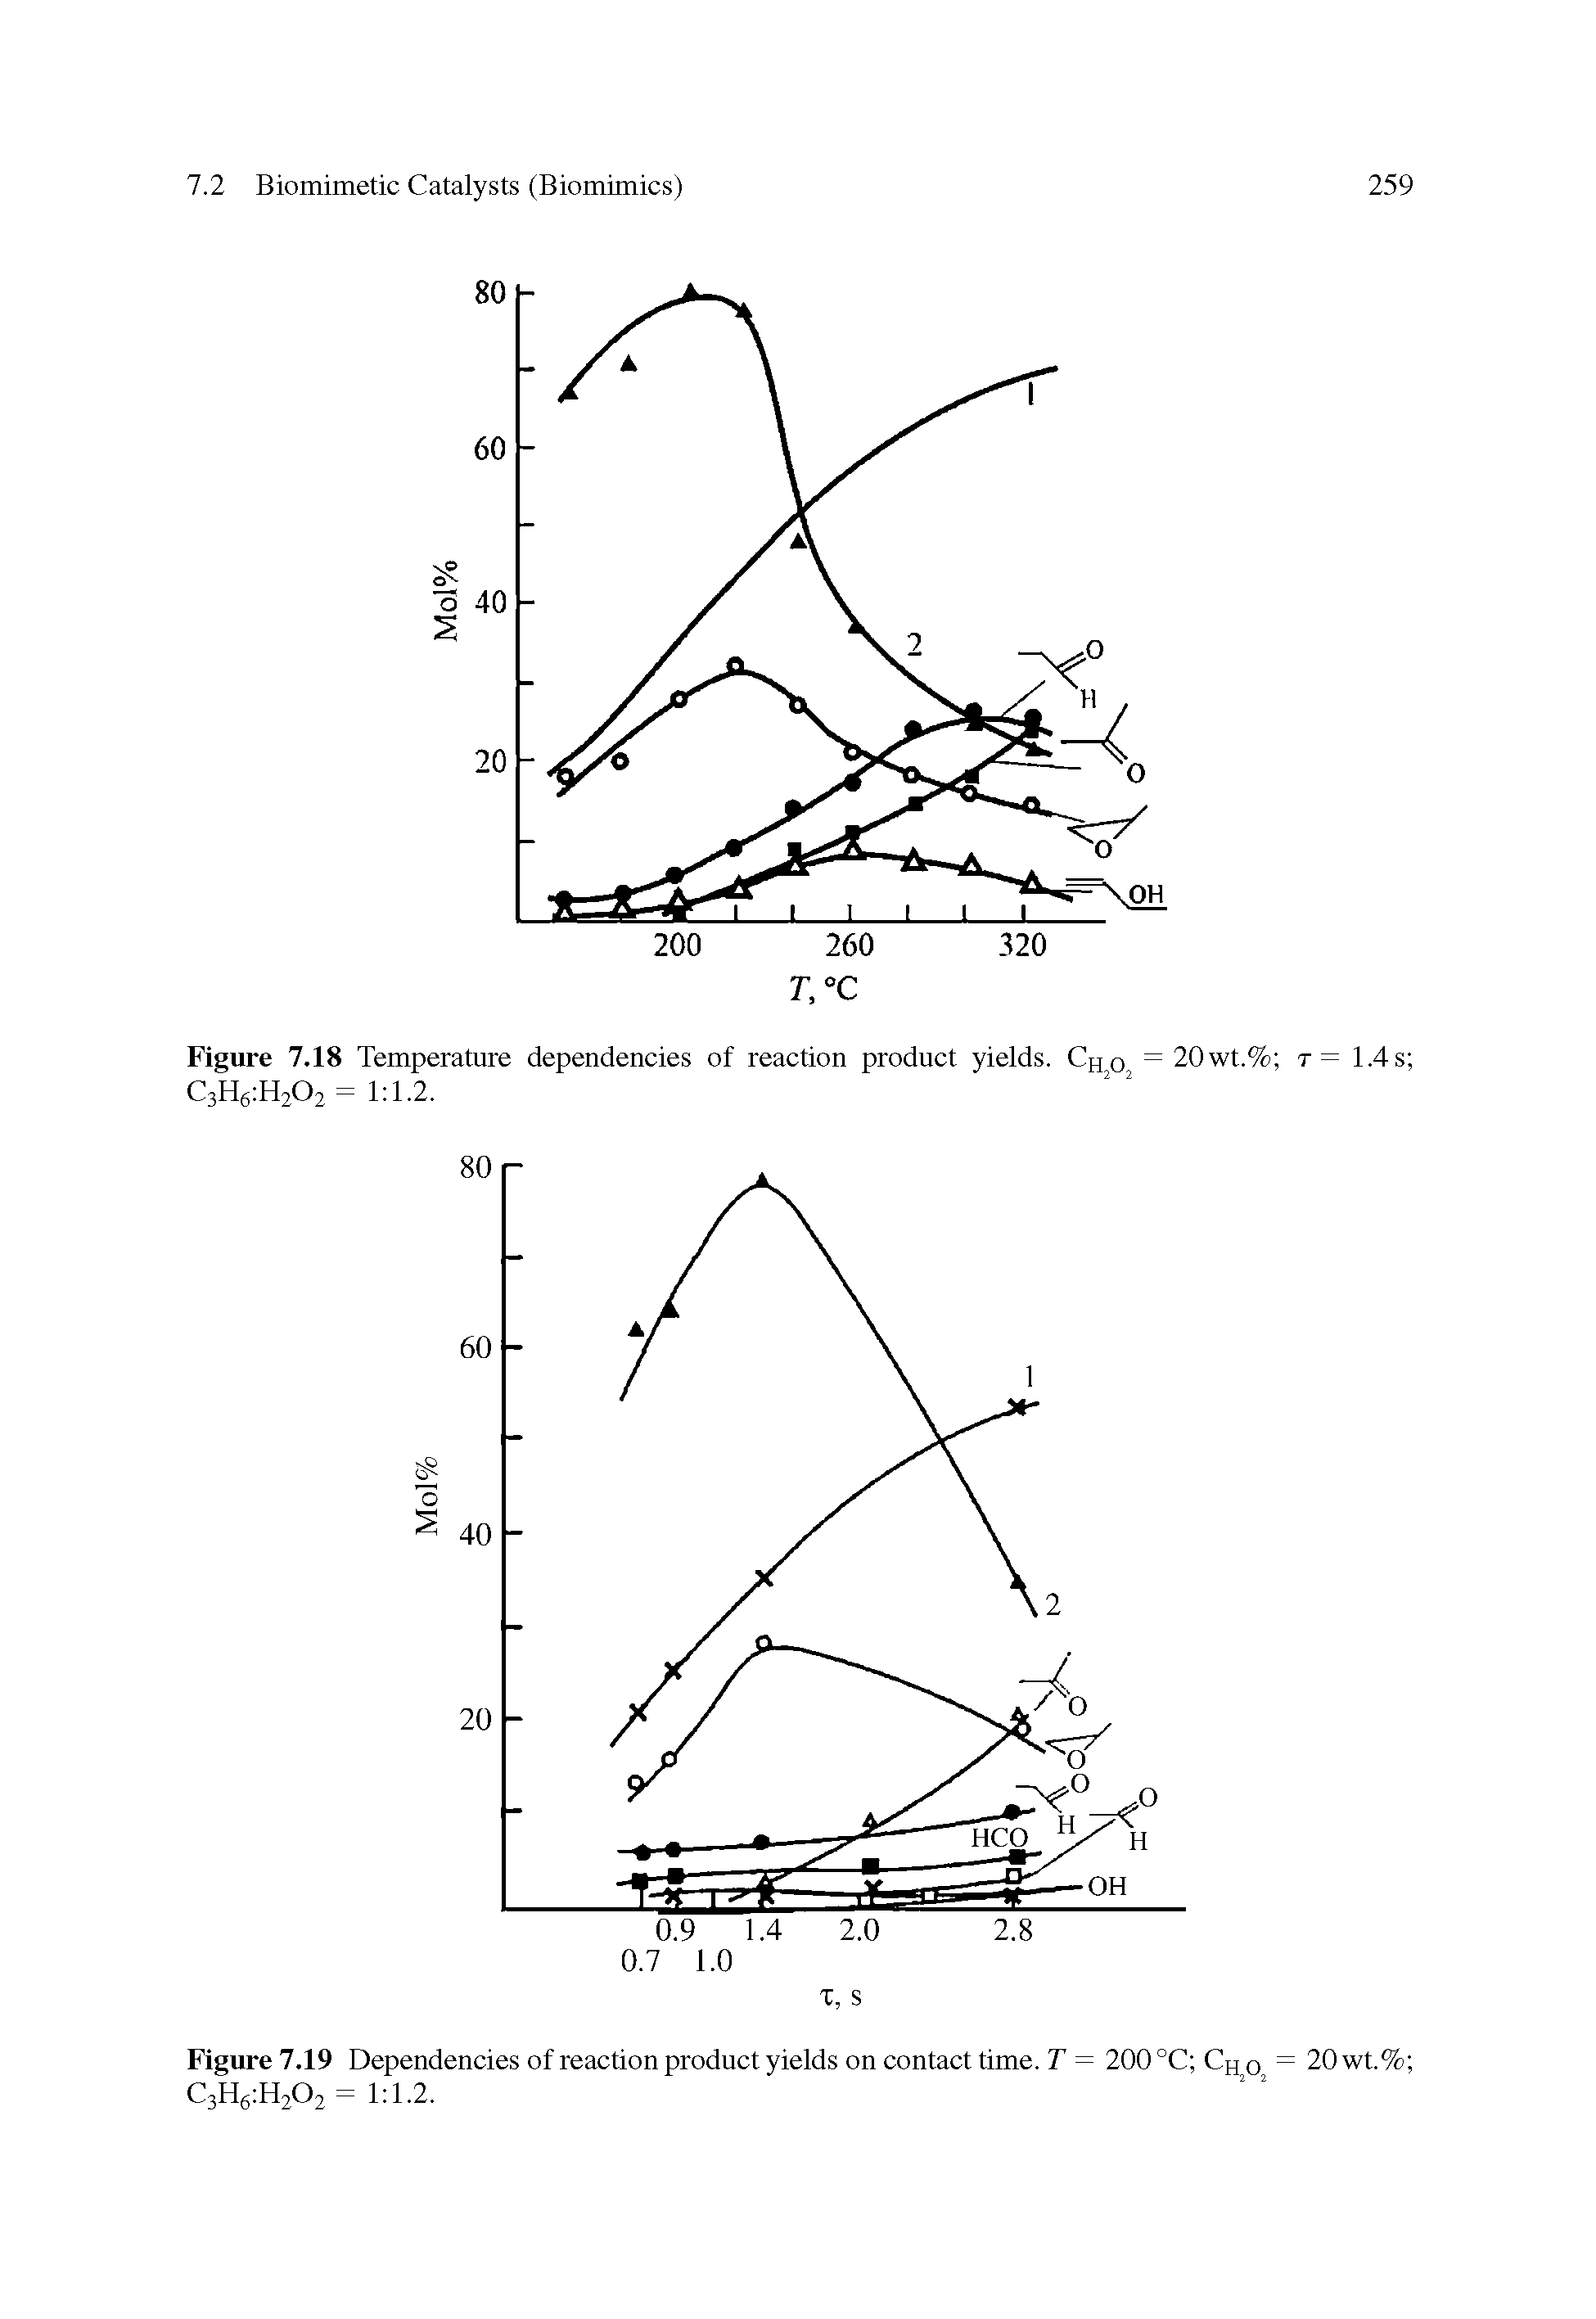 Figure 7.18 Temperature dependencies of reaction product yields. CH0 = 20wt.% t= 1.4 s C3H6 H202 = 1 1.2.